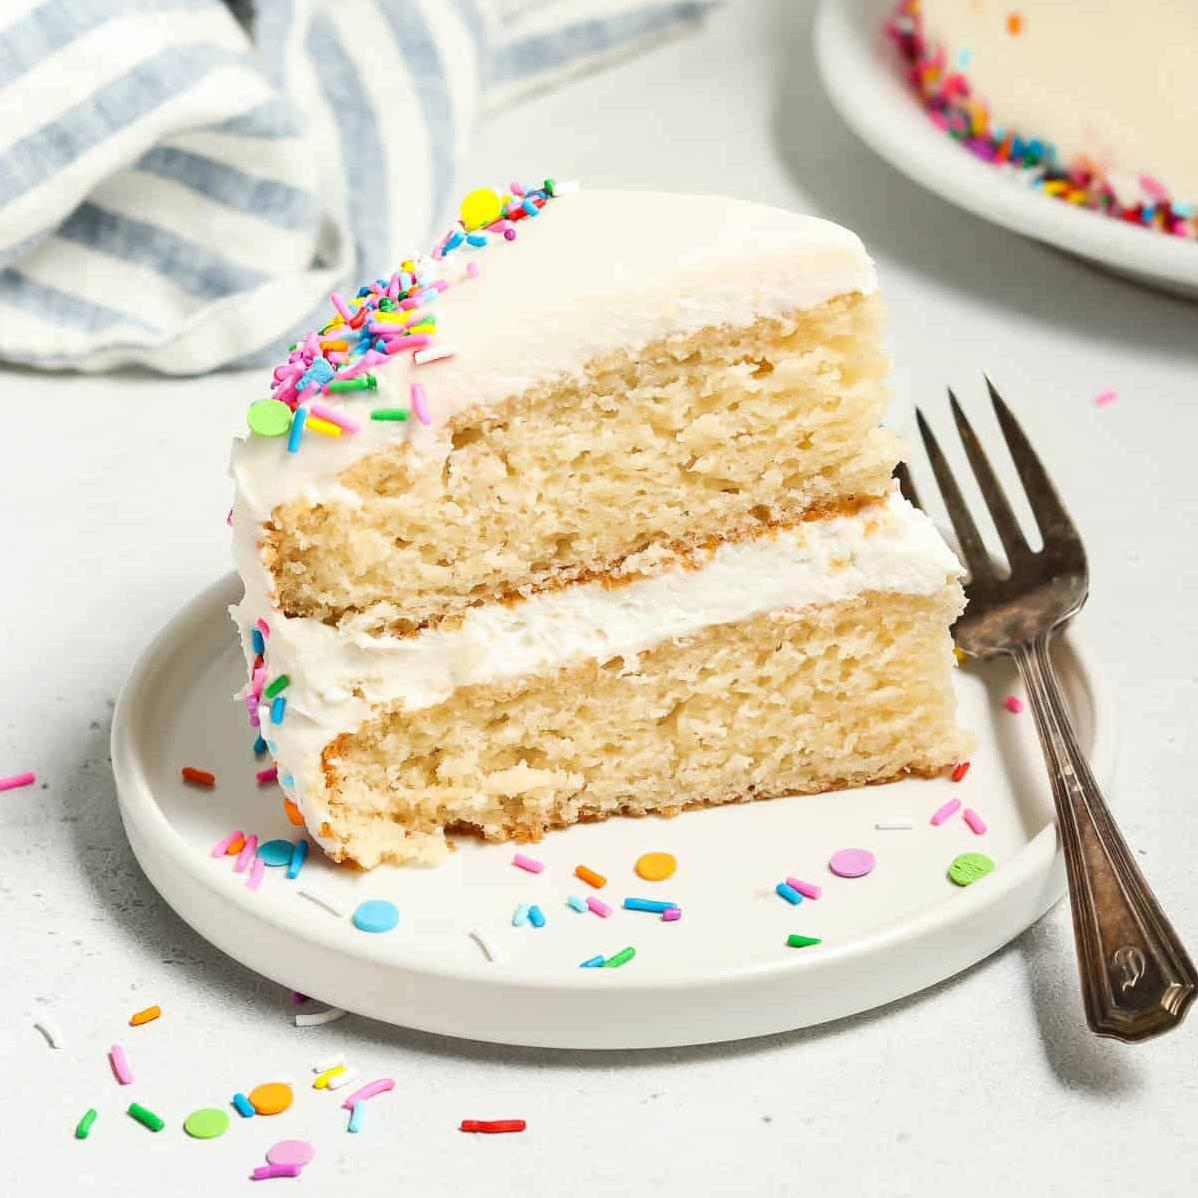  You don't need eggs or dairy for a tender, moist, and perfectly delicious cake.